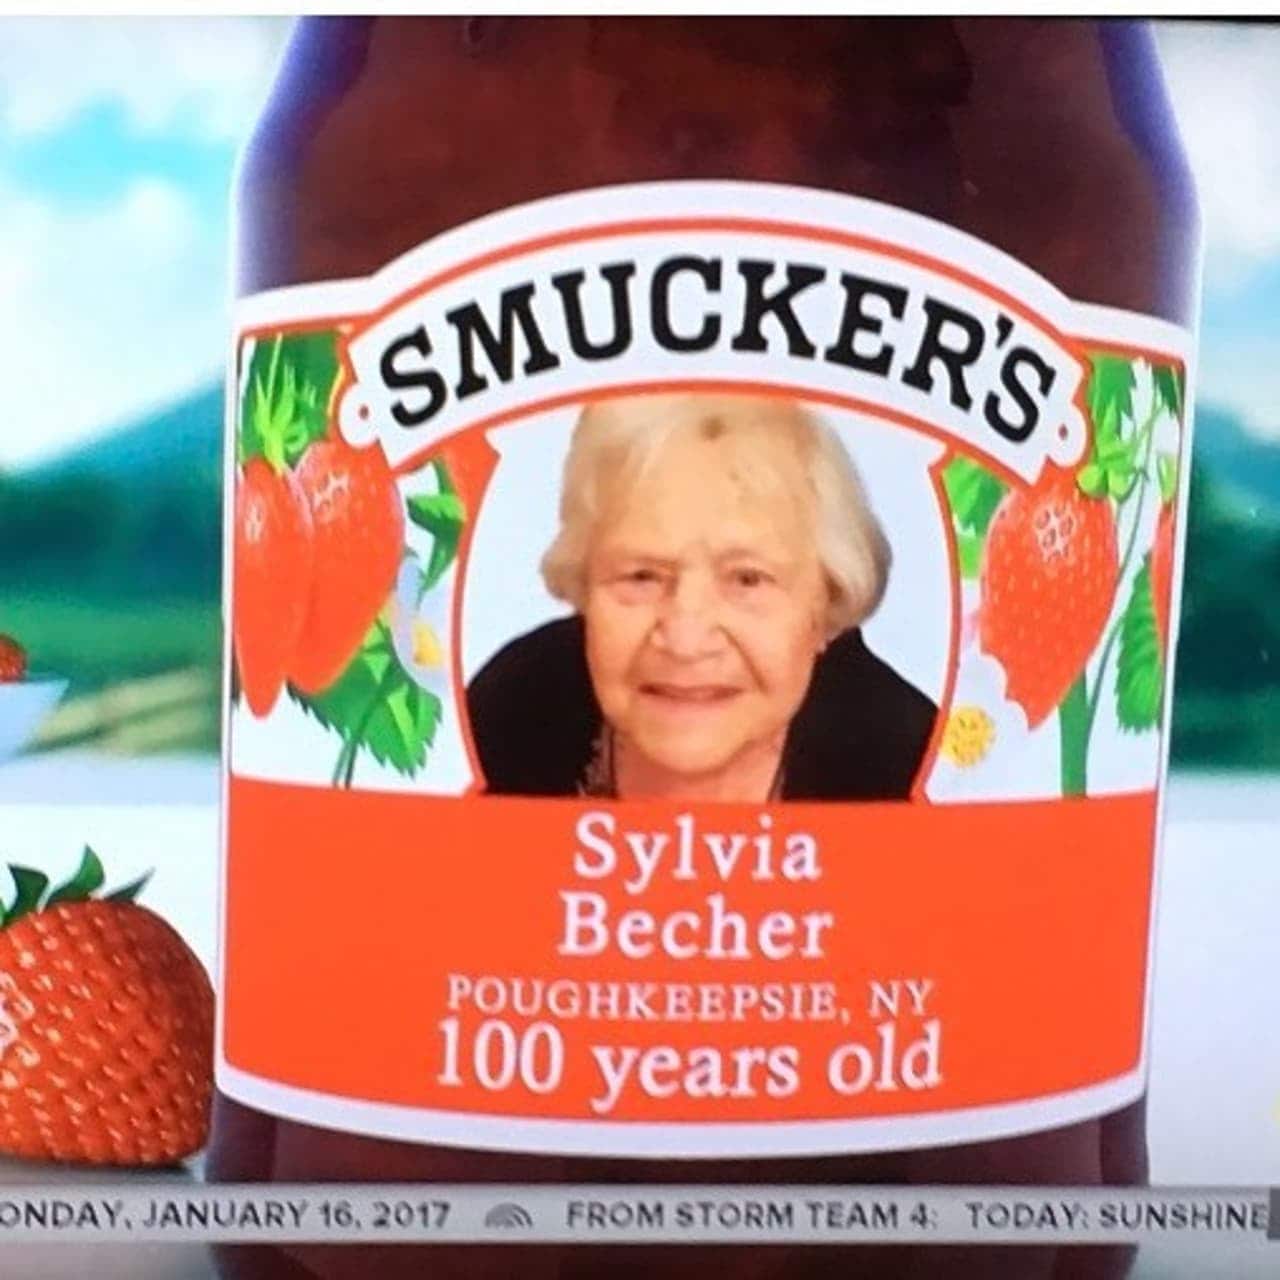 Sylvia Becher was featured on a Smuckers Jar for her 100th birthday.